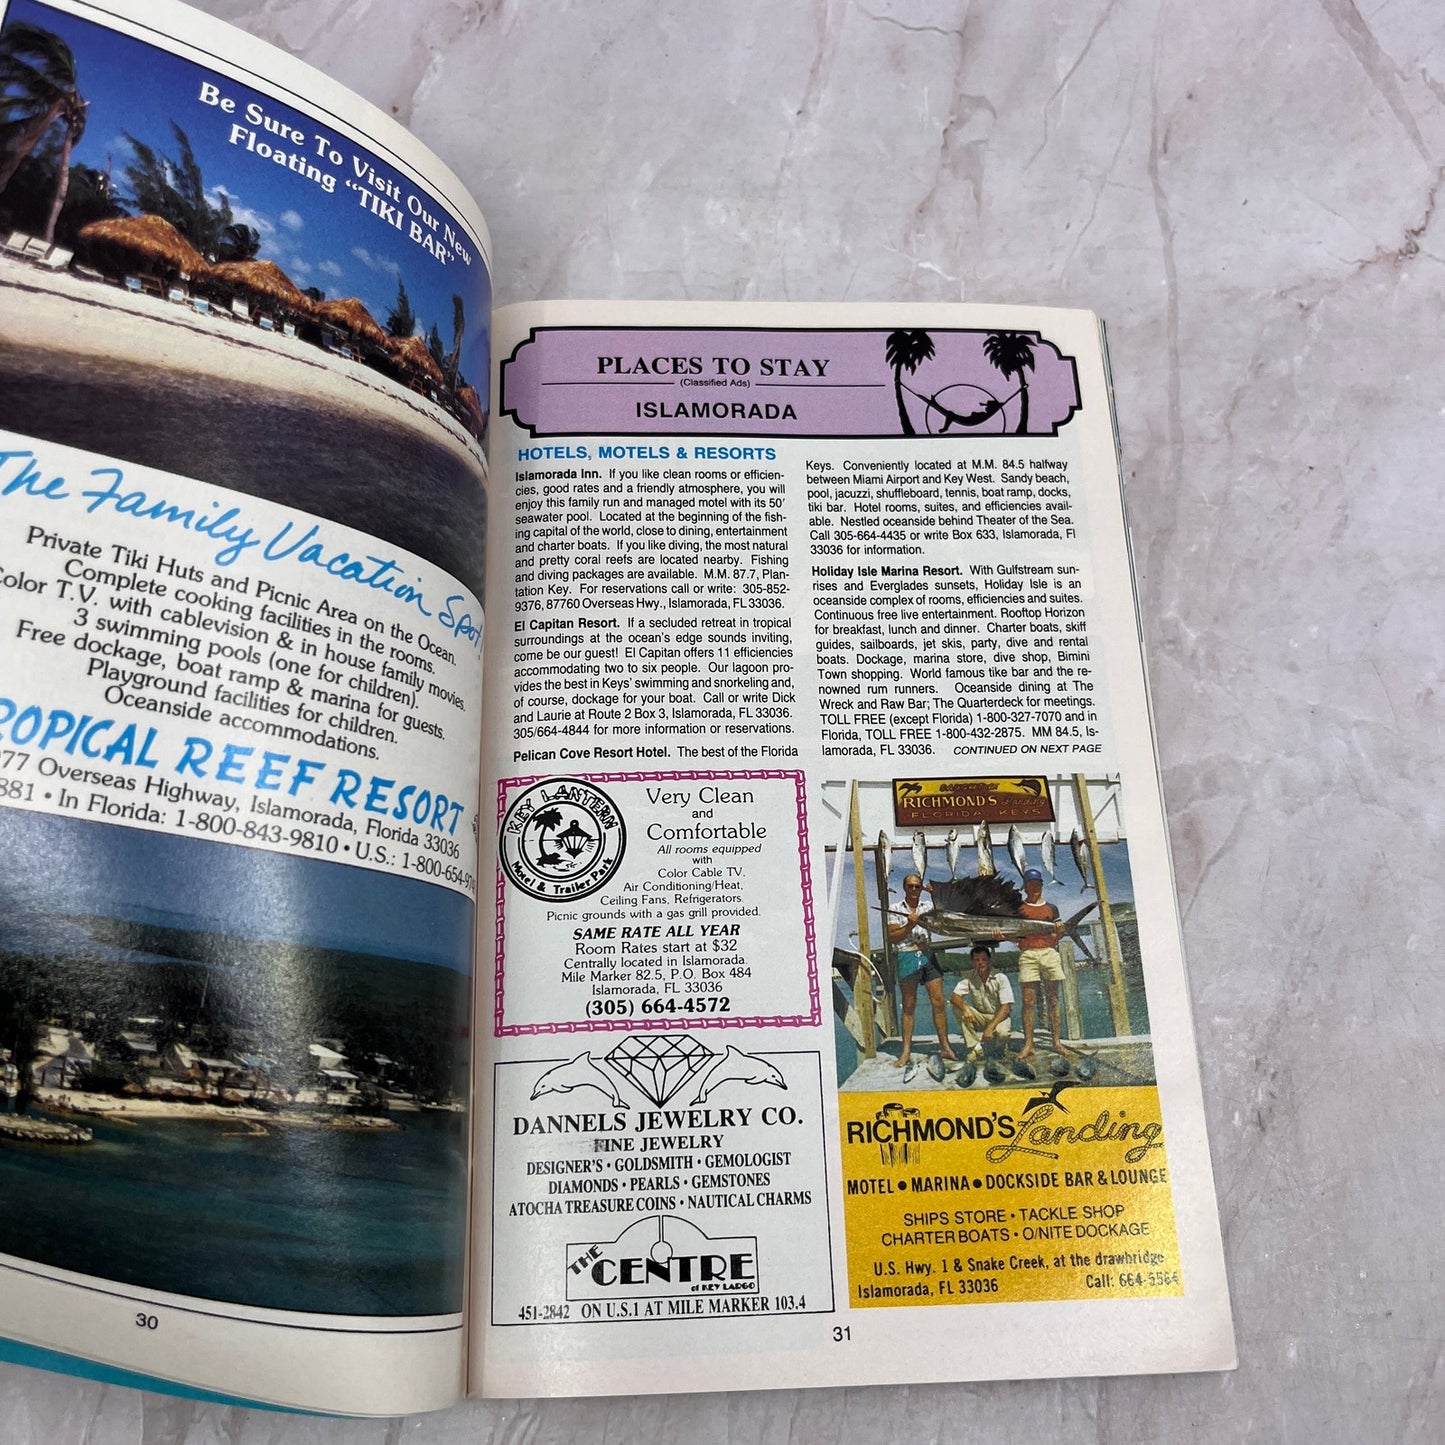 1987 Humm's Guide to the Florida Keys and Key West Travel Booklet TH9-LX1